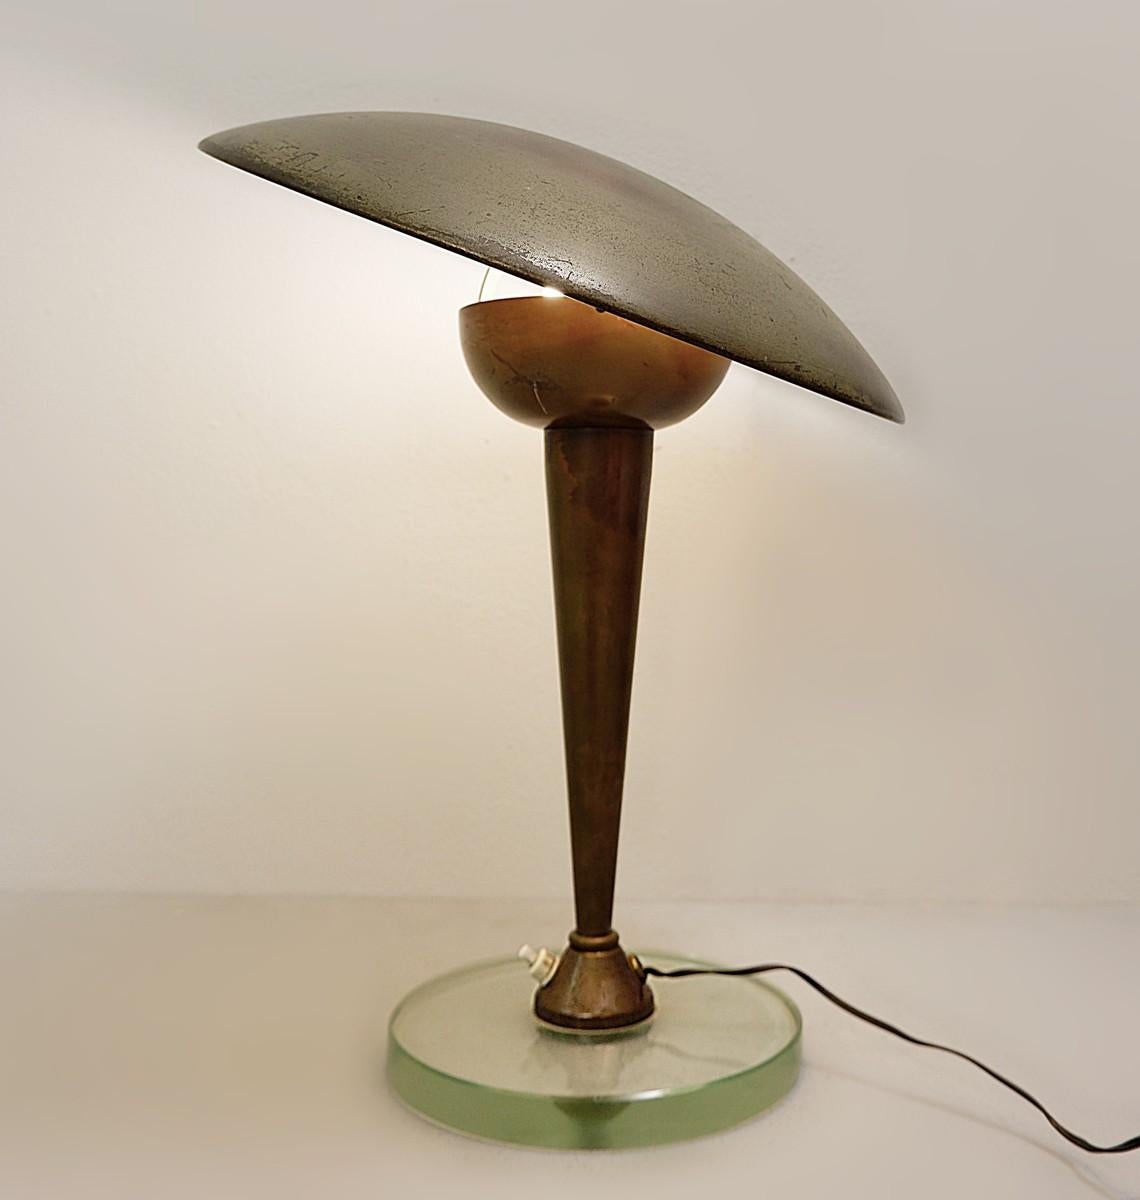 Italian Brass and Glass Desk Lamp in the style of Stilnovo - 1950s For Sale